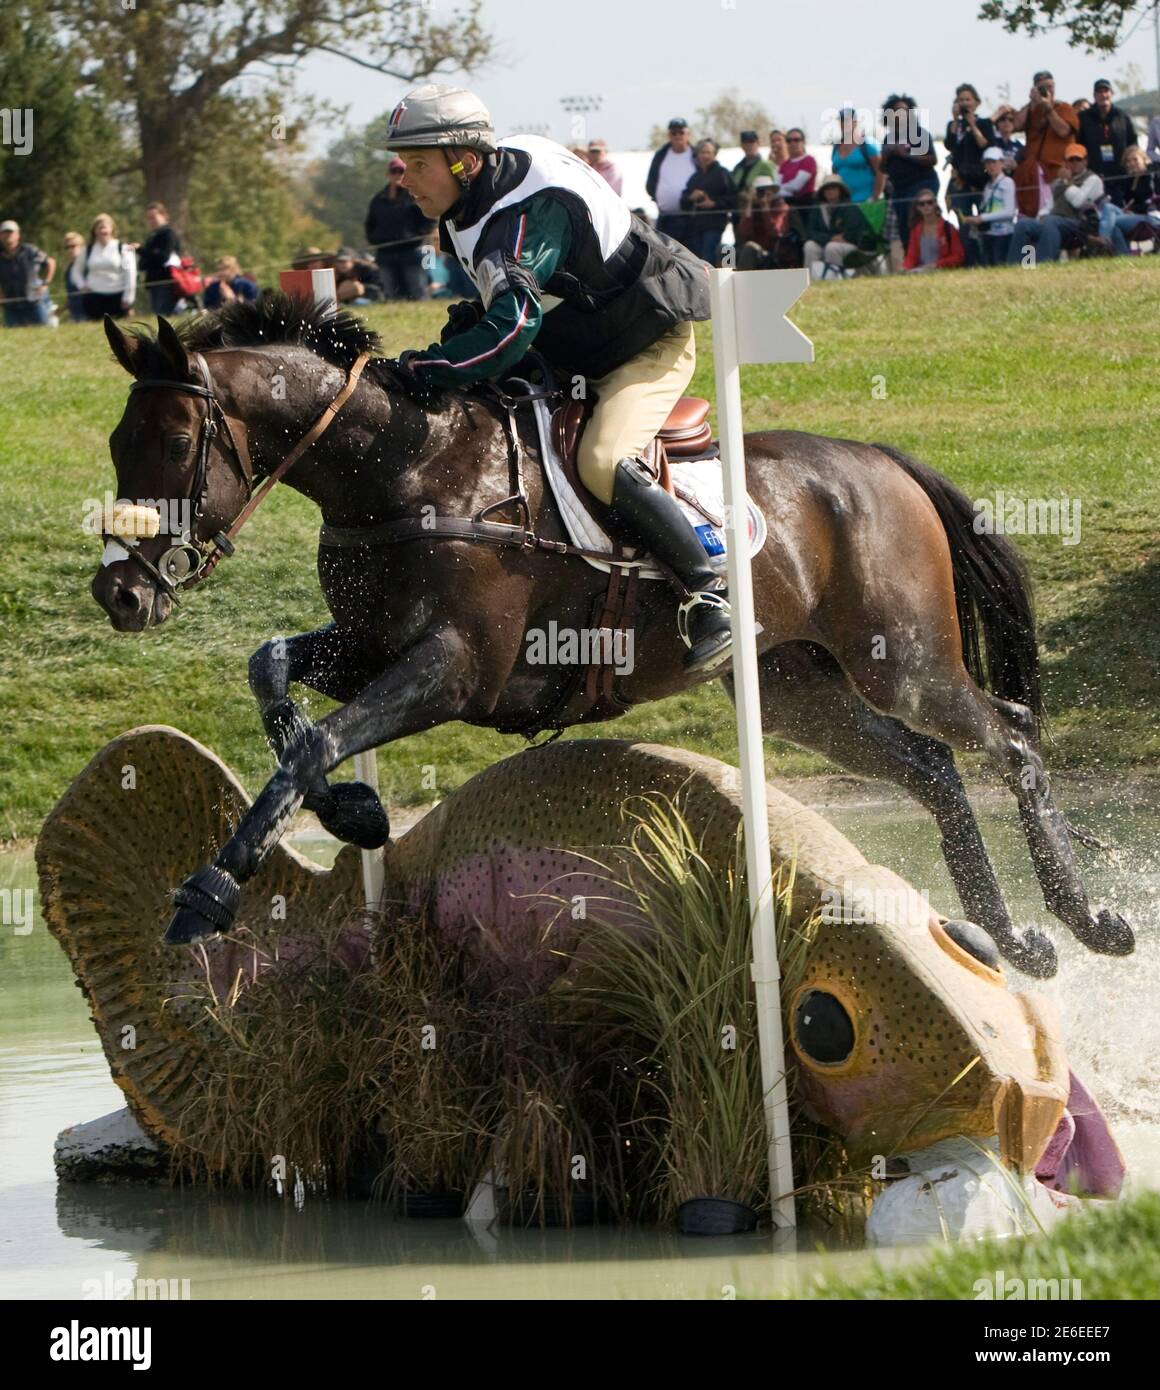 Donatien Schauly of France riding Seculaire competes in the cross country phase of the Eventing World Championship at the World Equestrian Games in Lexington, Kentucky, October 2, 2010. REUTERS/Caren Firouz  (UNITED STATES - Tags: ANIMALS SPORT EQUESTRIANISM) Stock Photo